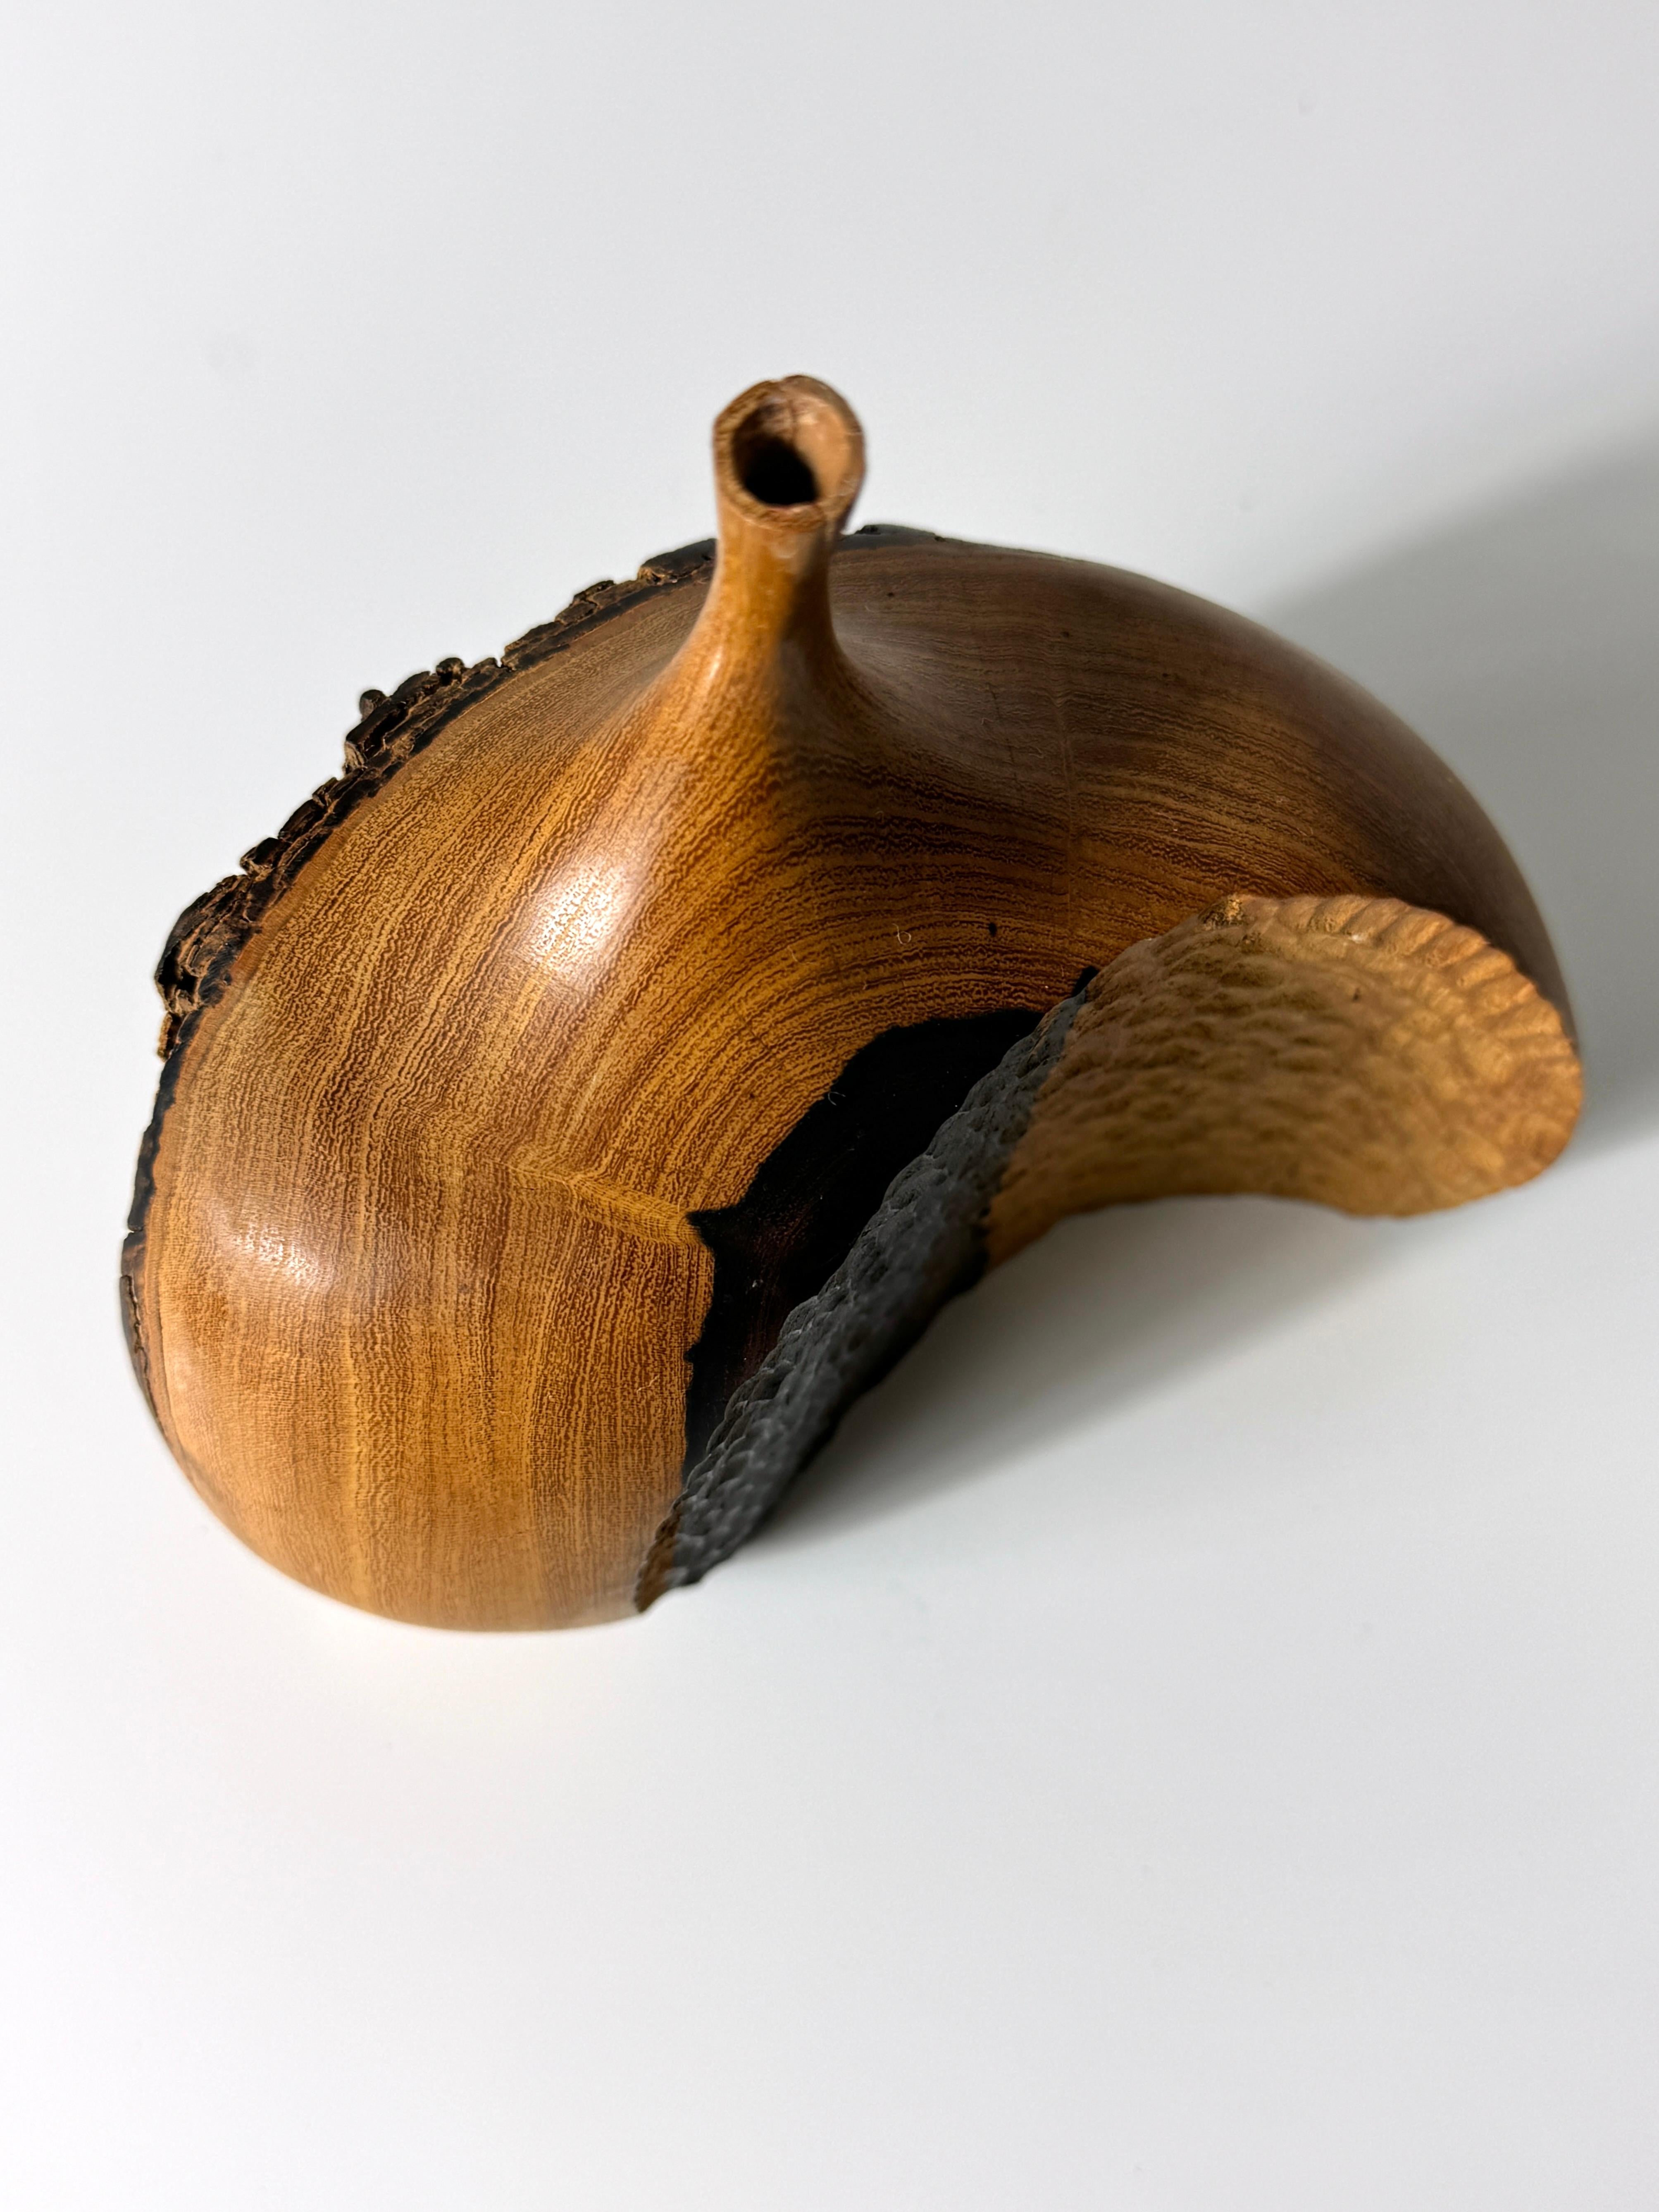 Modernist vessel or weedpot by California crafstman Doug Ayers 1979
Executed in Desert Ironwood with in-curved chip carving opposite a live edge 
Signed to underside with original labeling

6 inch width
3 inch depth
6 inch height